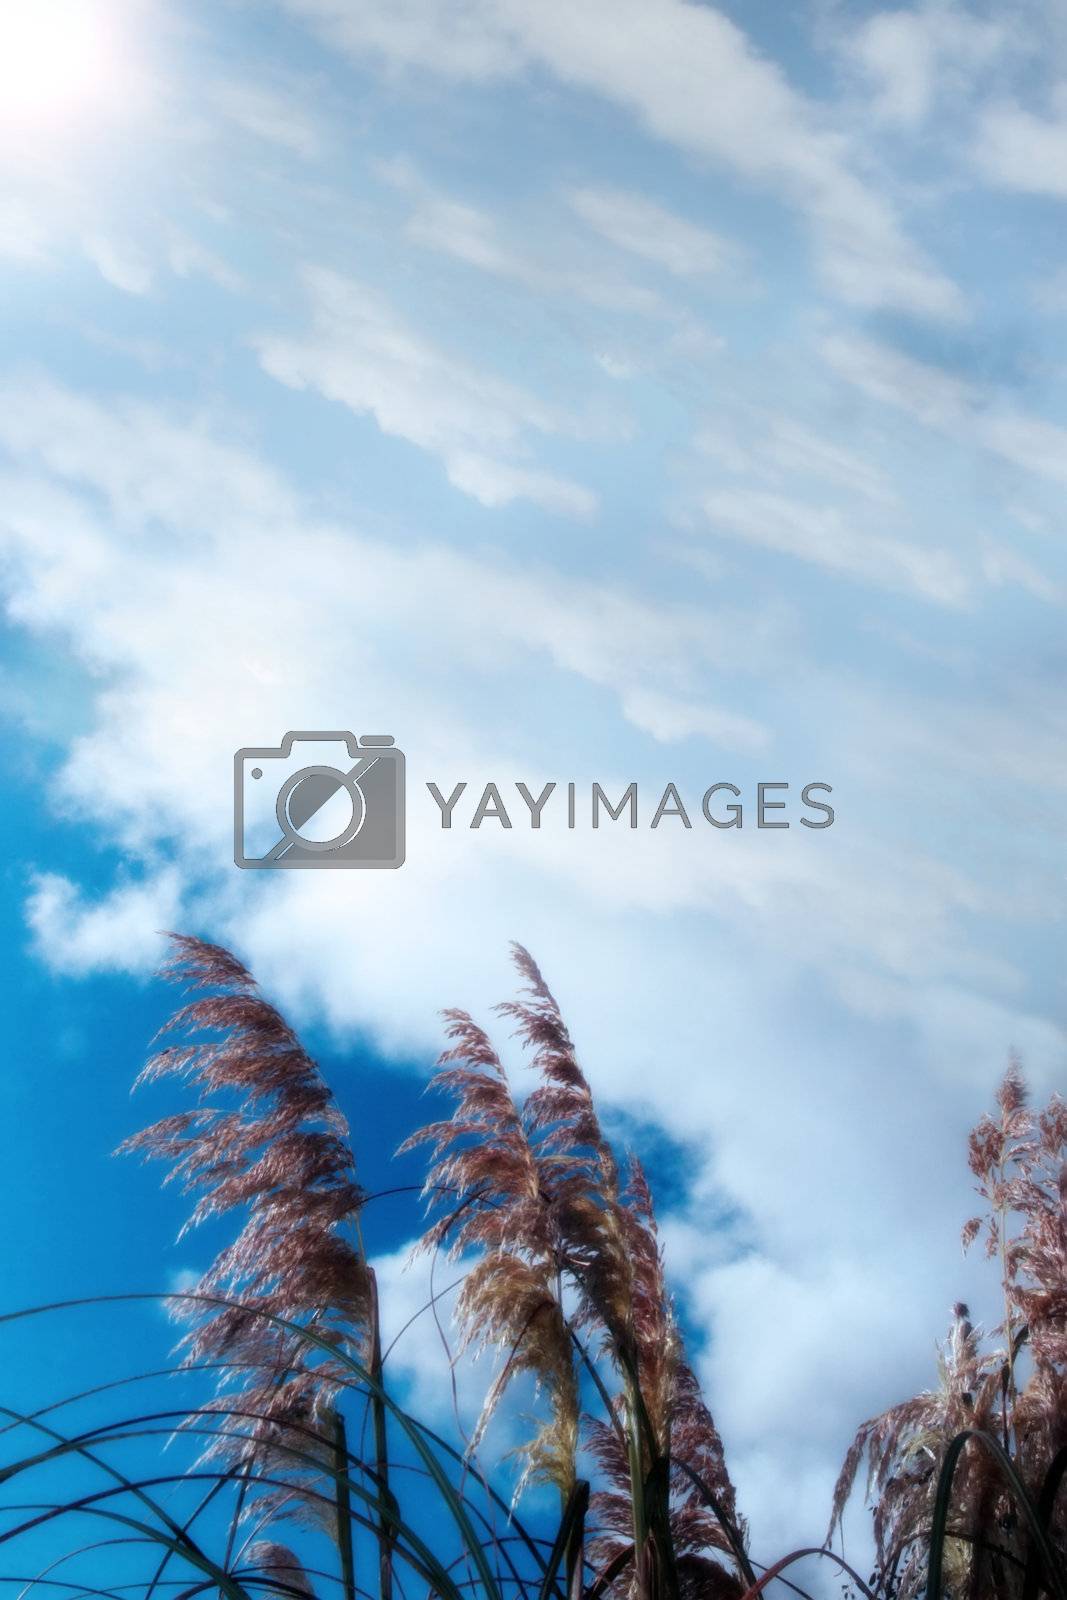 Royalty free image of tall grass by morrbyte